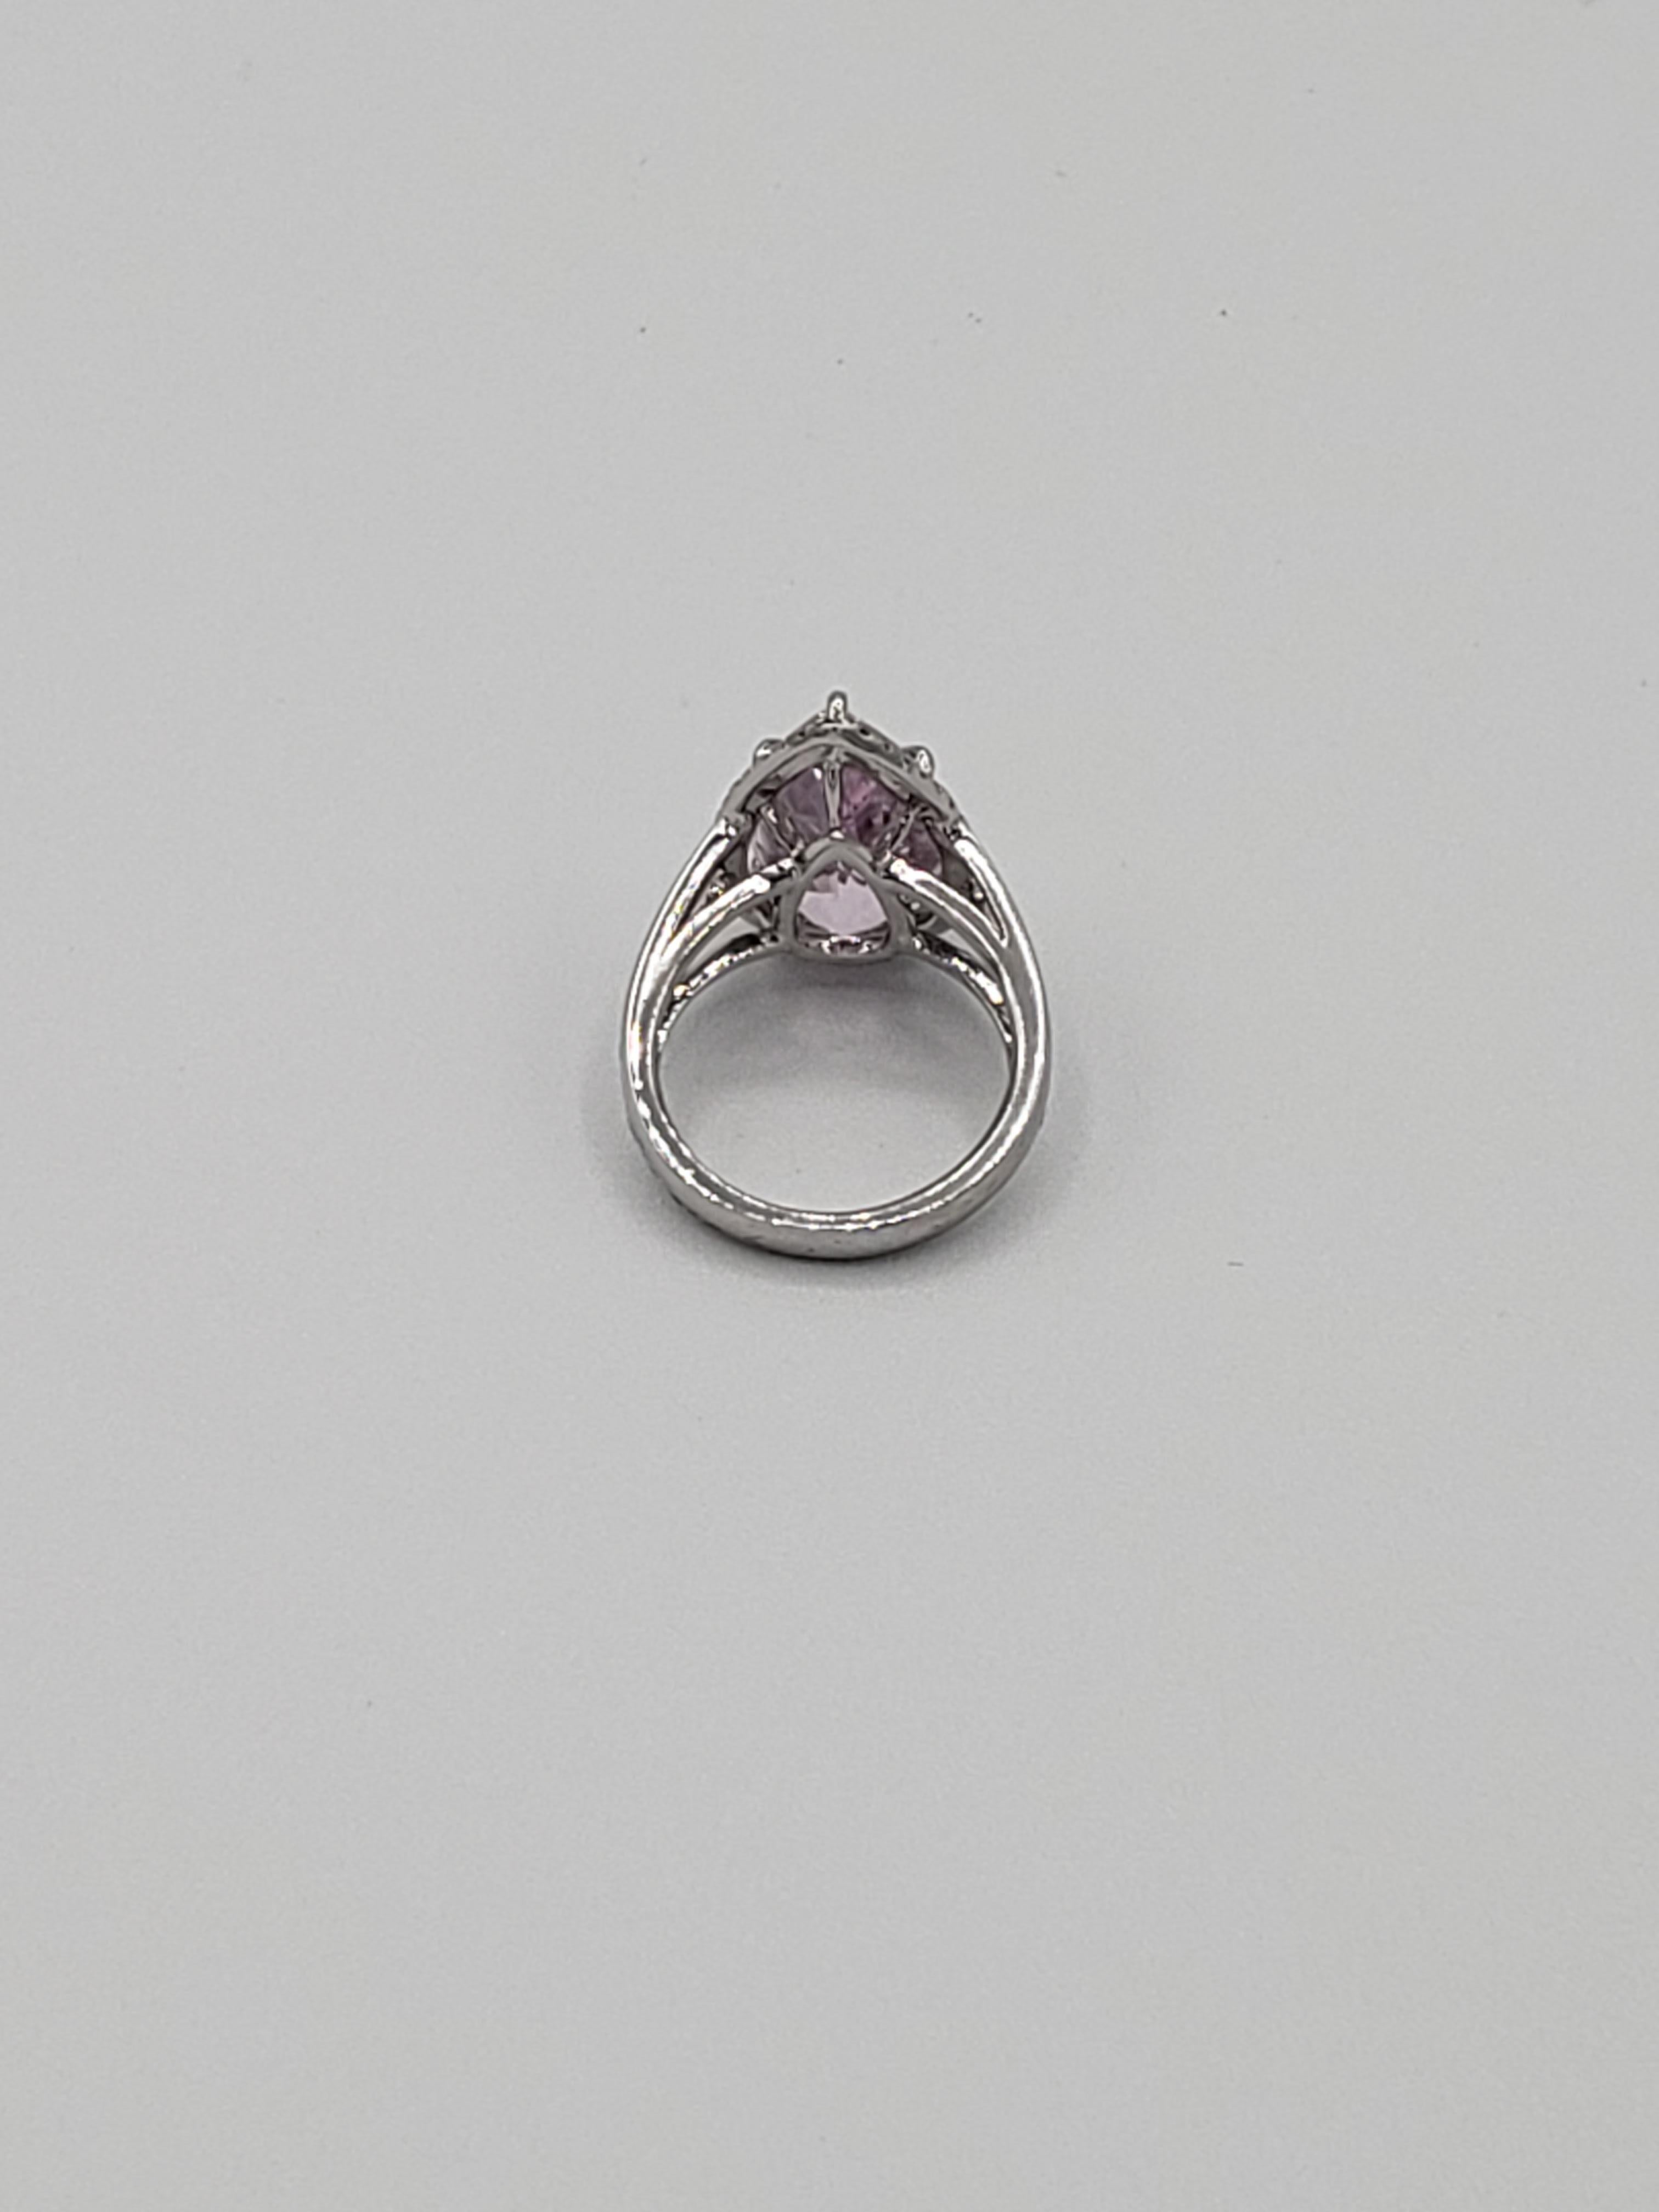 NEW CERTIFIED Natural Kunzite 7.83 Ct and Diamond Ring in 14k White Gold For Sale 2